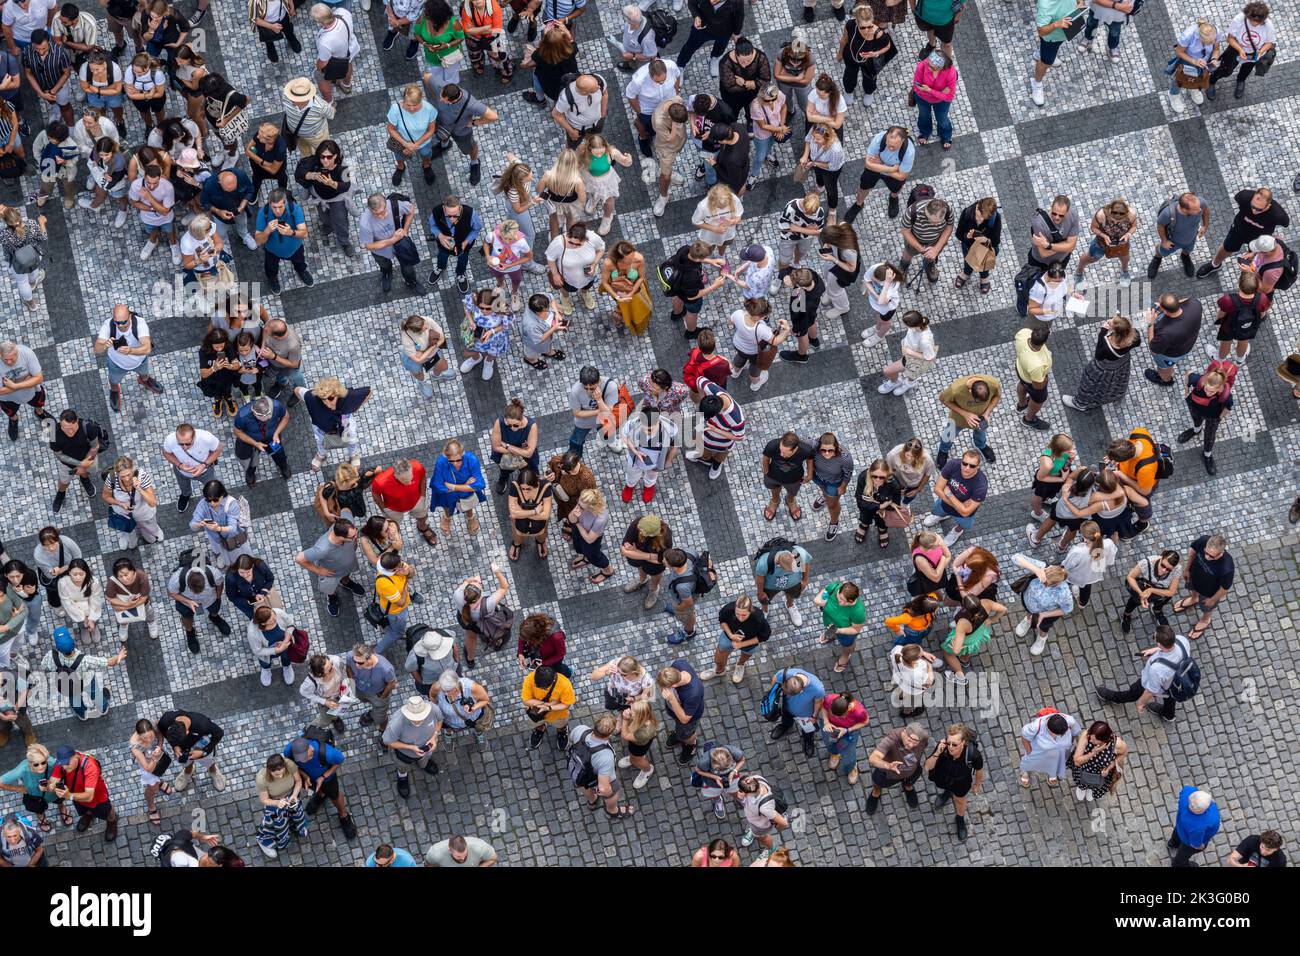 Prague, Czech Republic - 5 September 2022: Large and diverse group of people seen from above Stock Photo